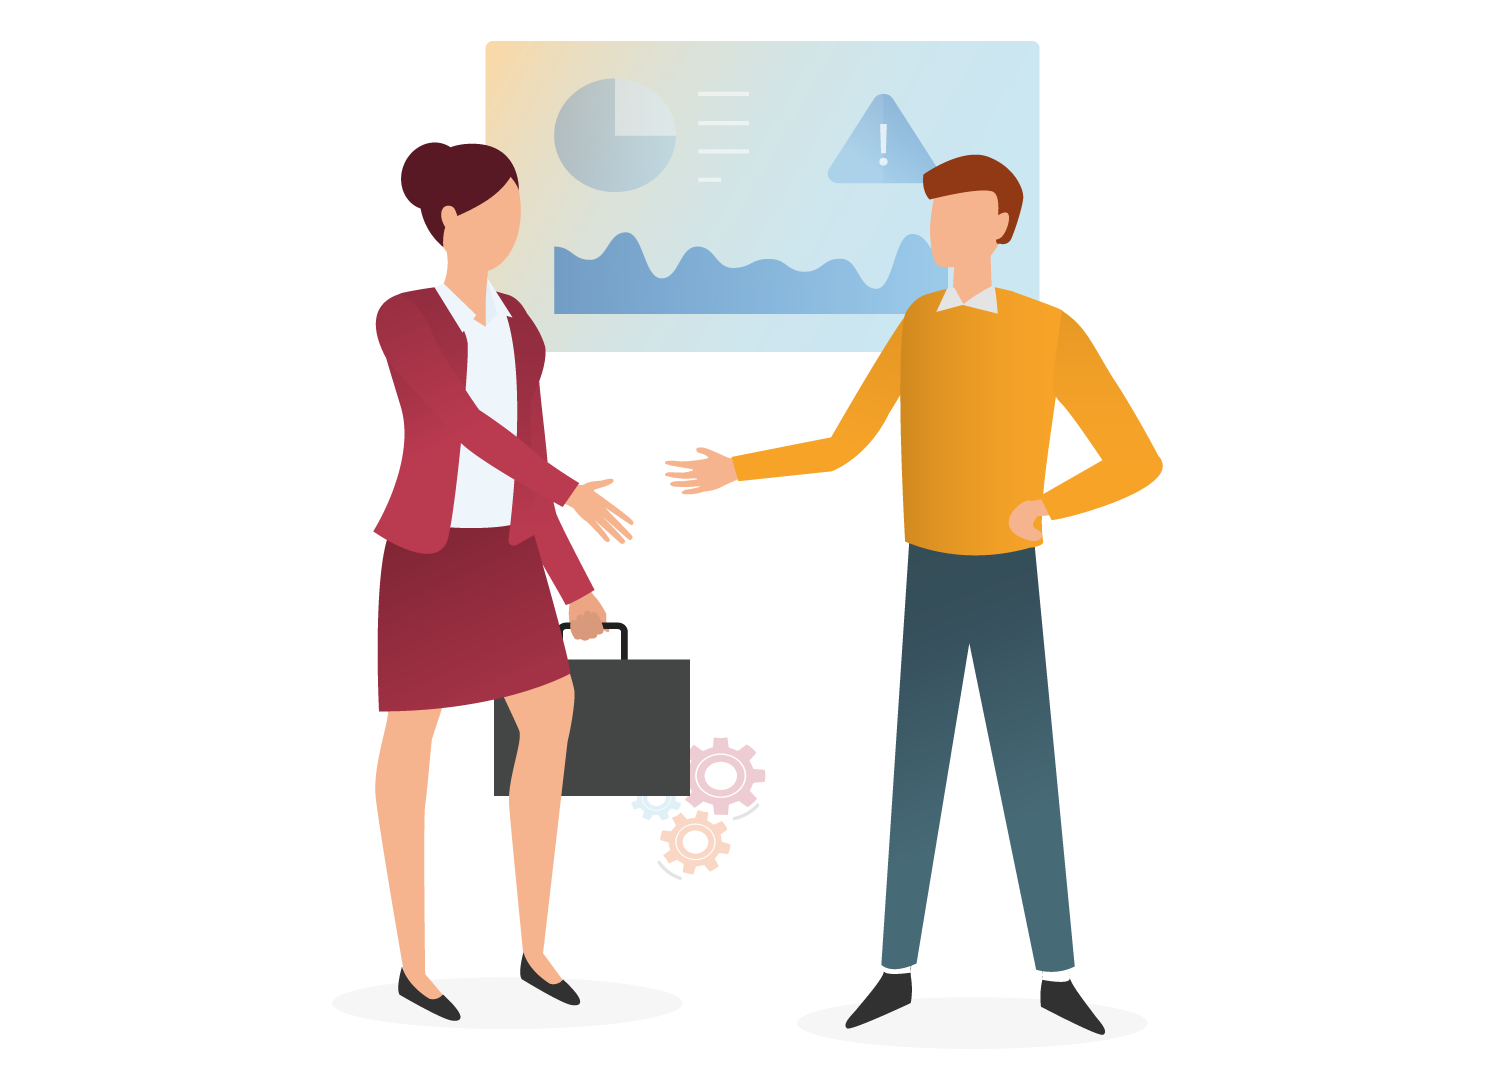 Vector image of a man and woman shaking hands